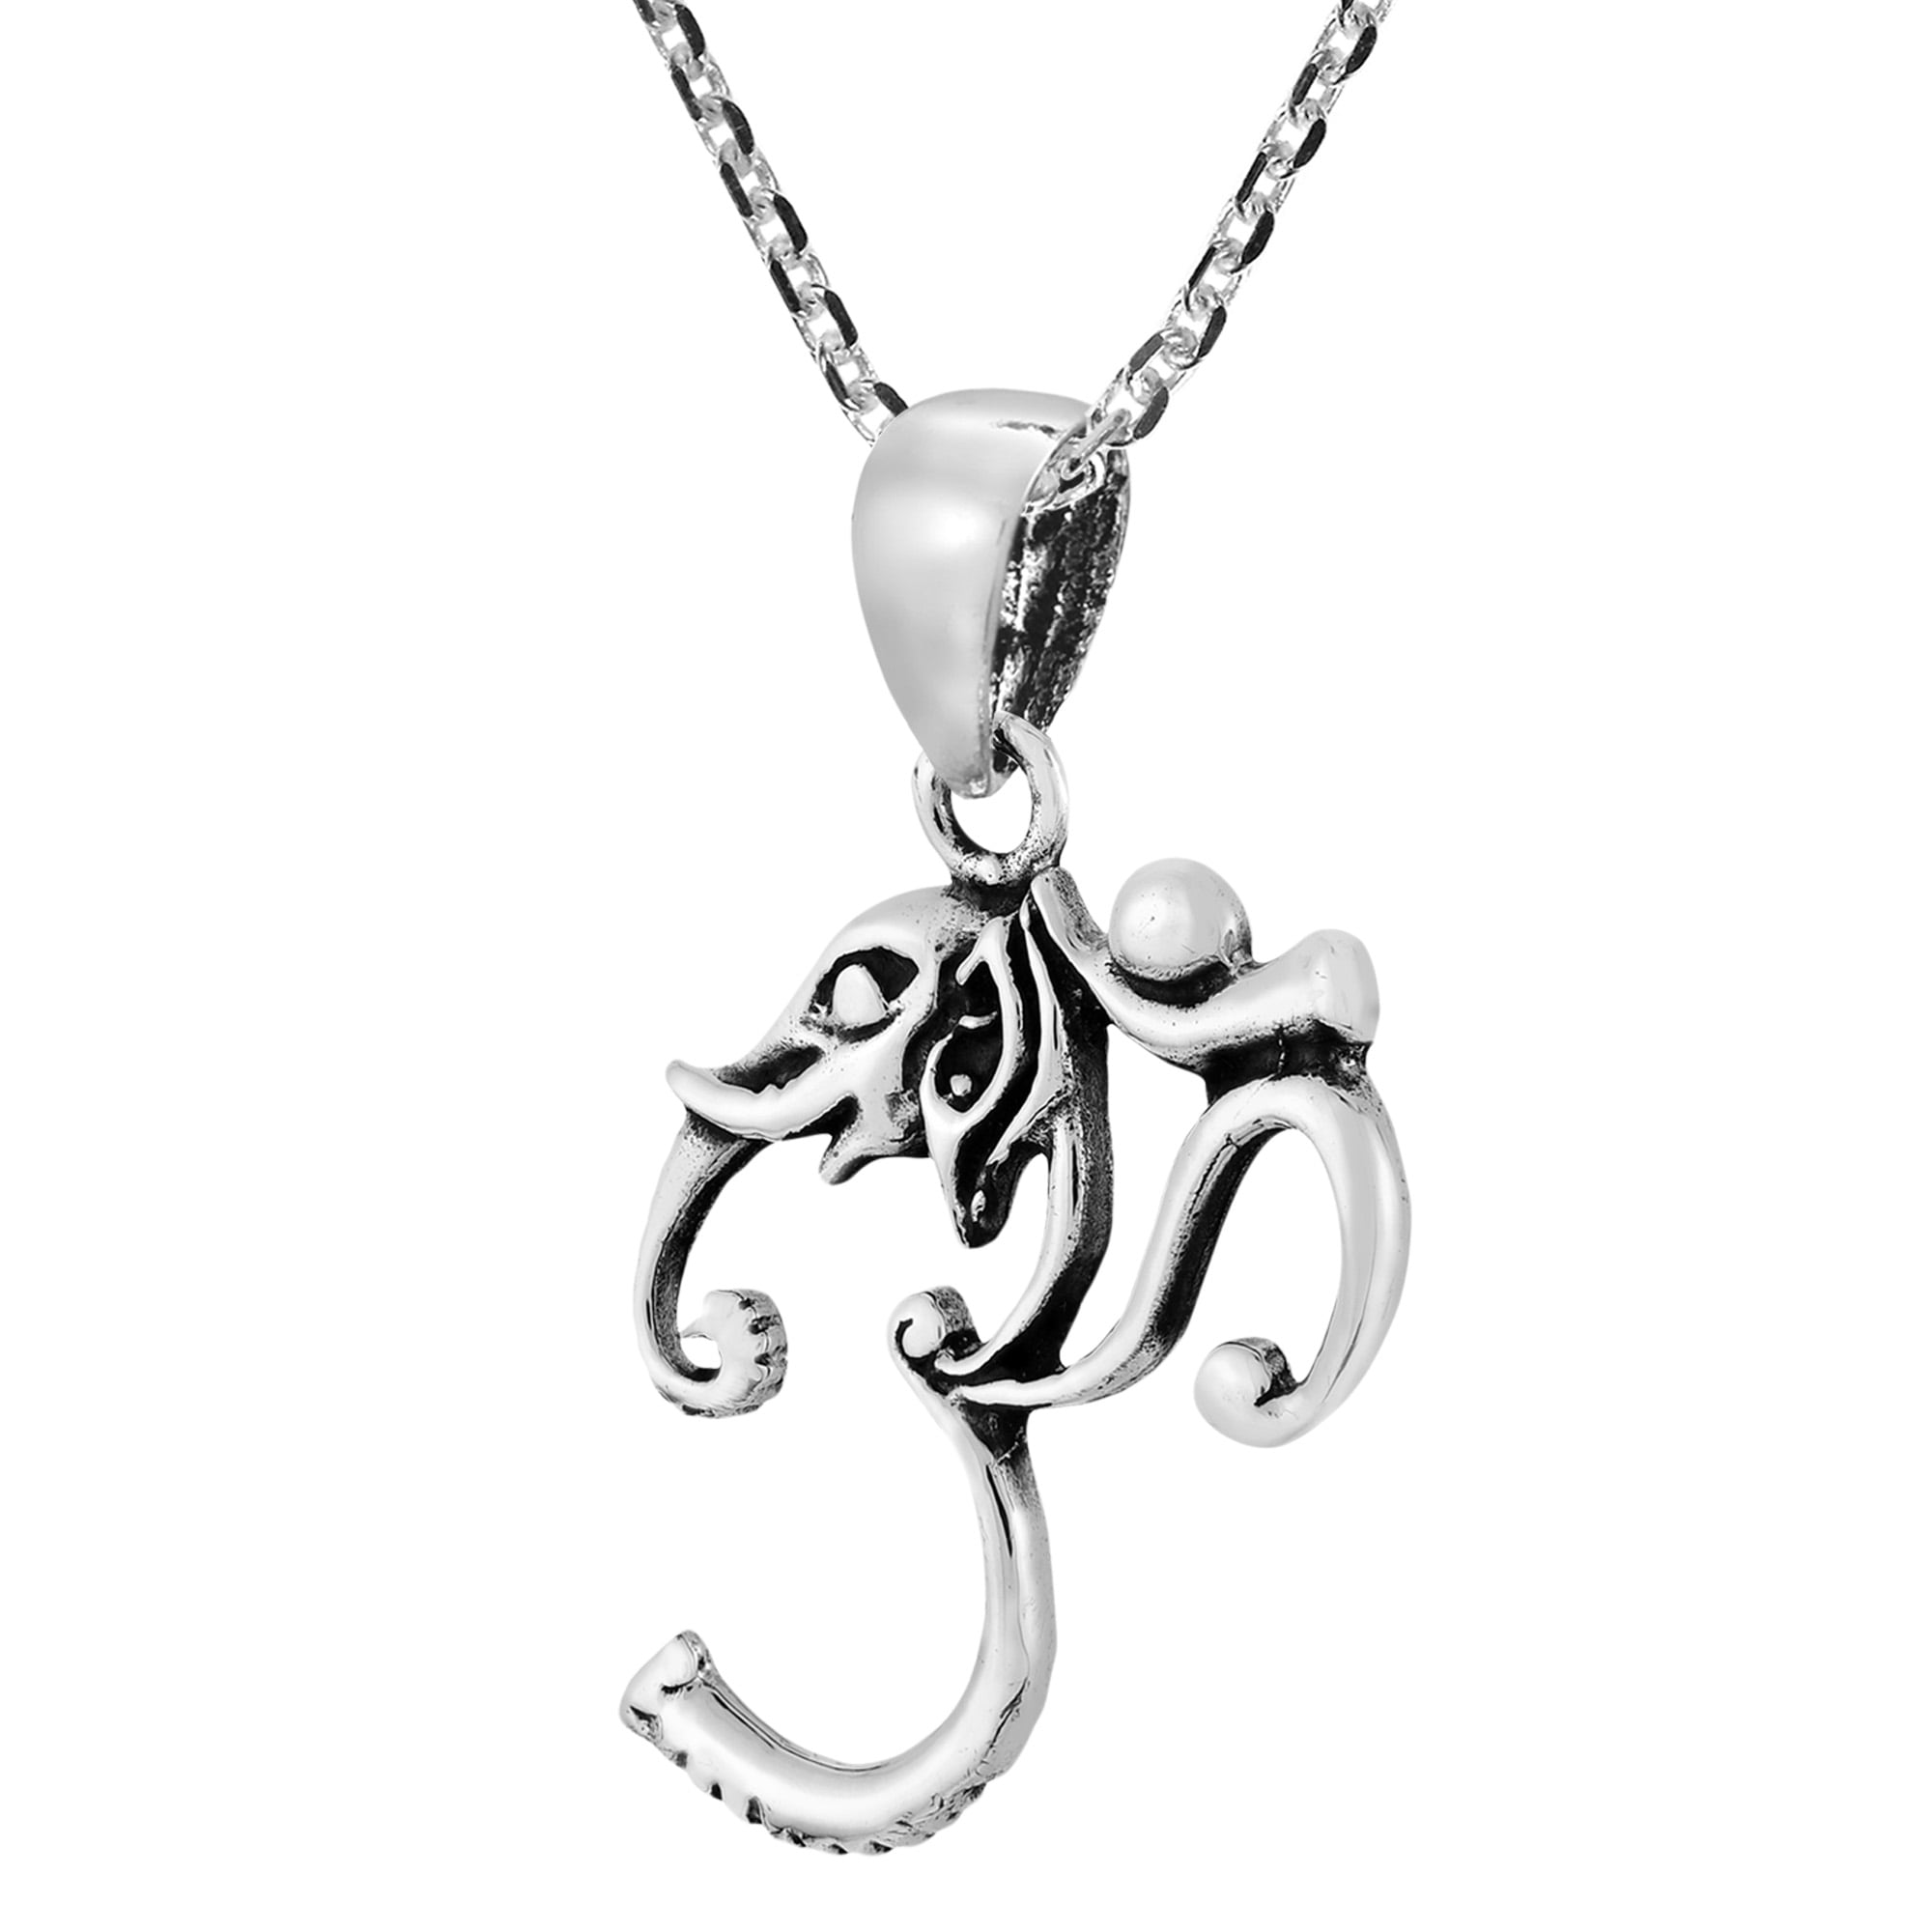 Handcrafted Solid 925 Sterling Silver ELEPHANT OHM/OM/AUM Lord Ganesha Pendant